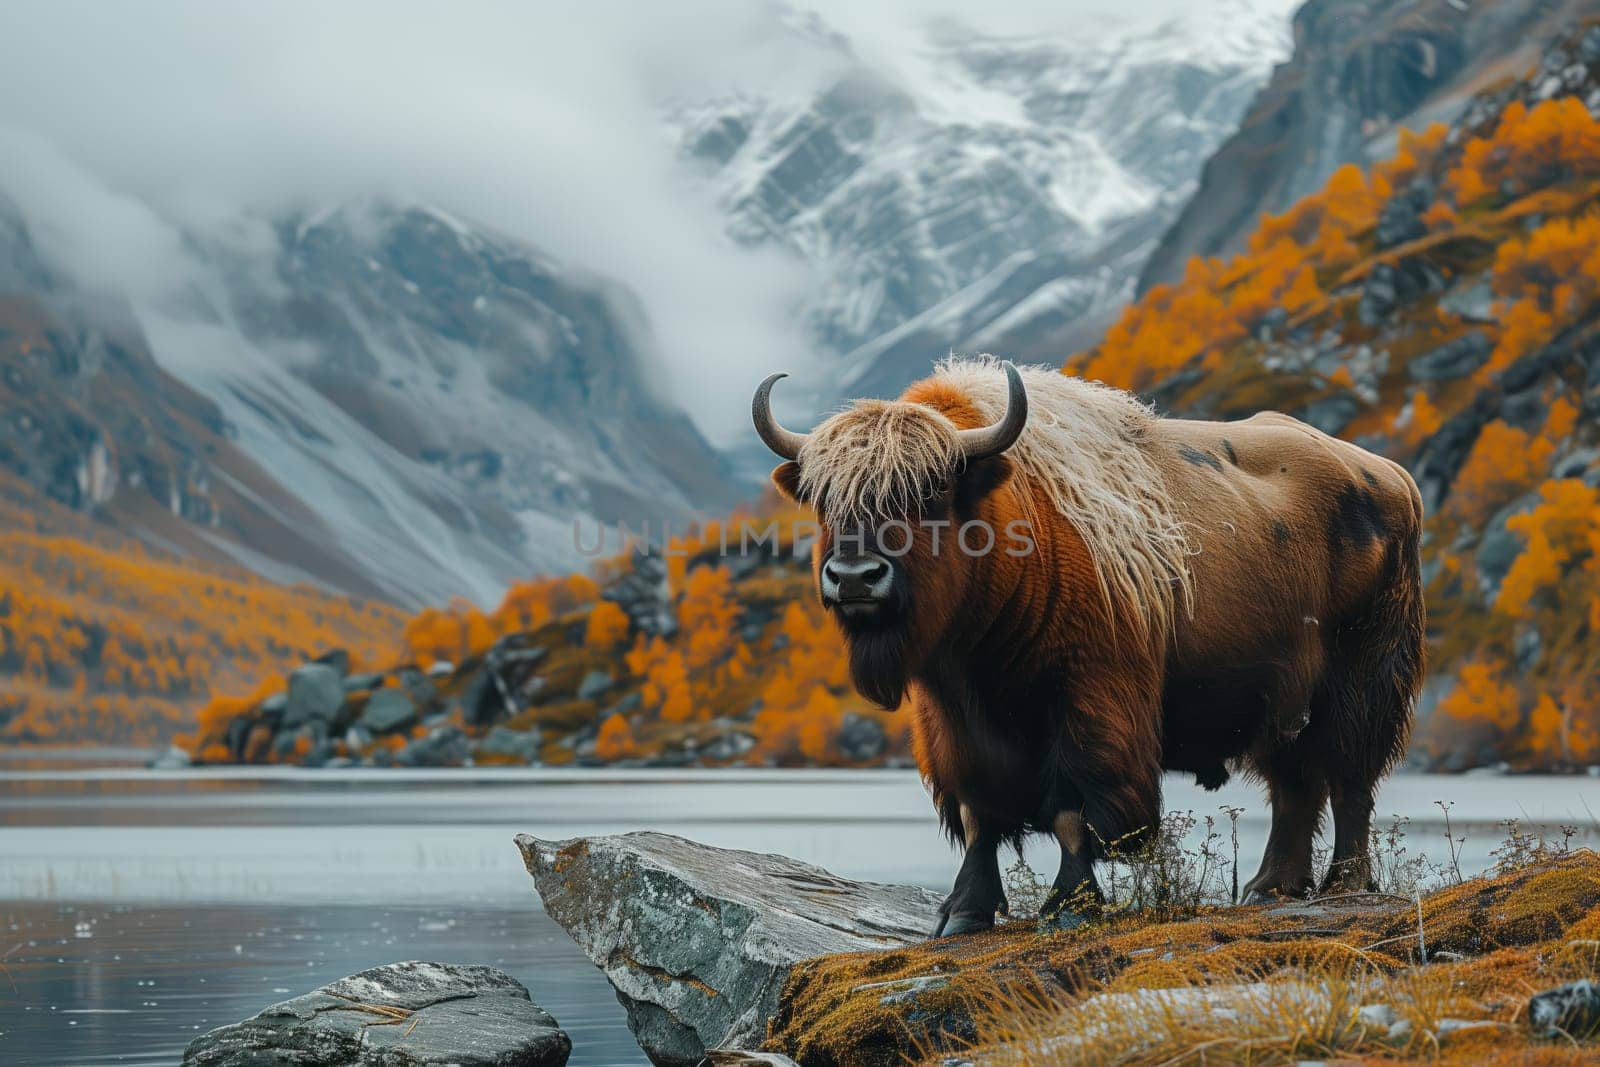 Bison on rock near mountain lake, under cloudy sky by richwolf